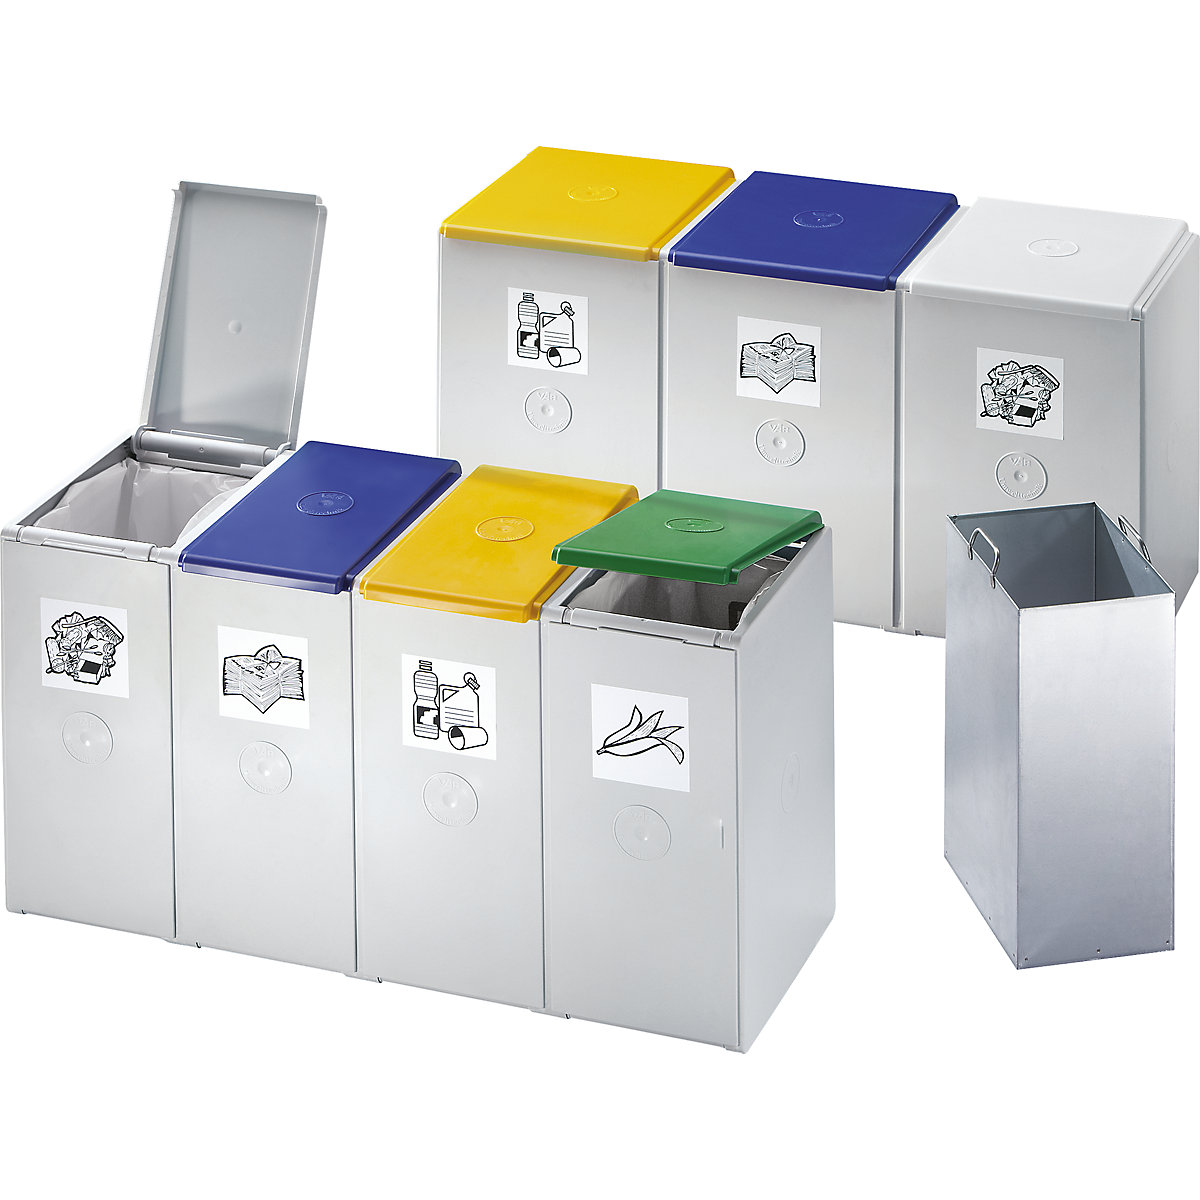 Recyclable waste collector made of plastic – VAR (Product illustration 3)-2